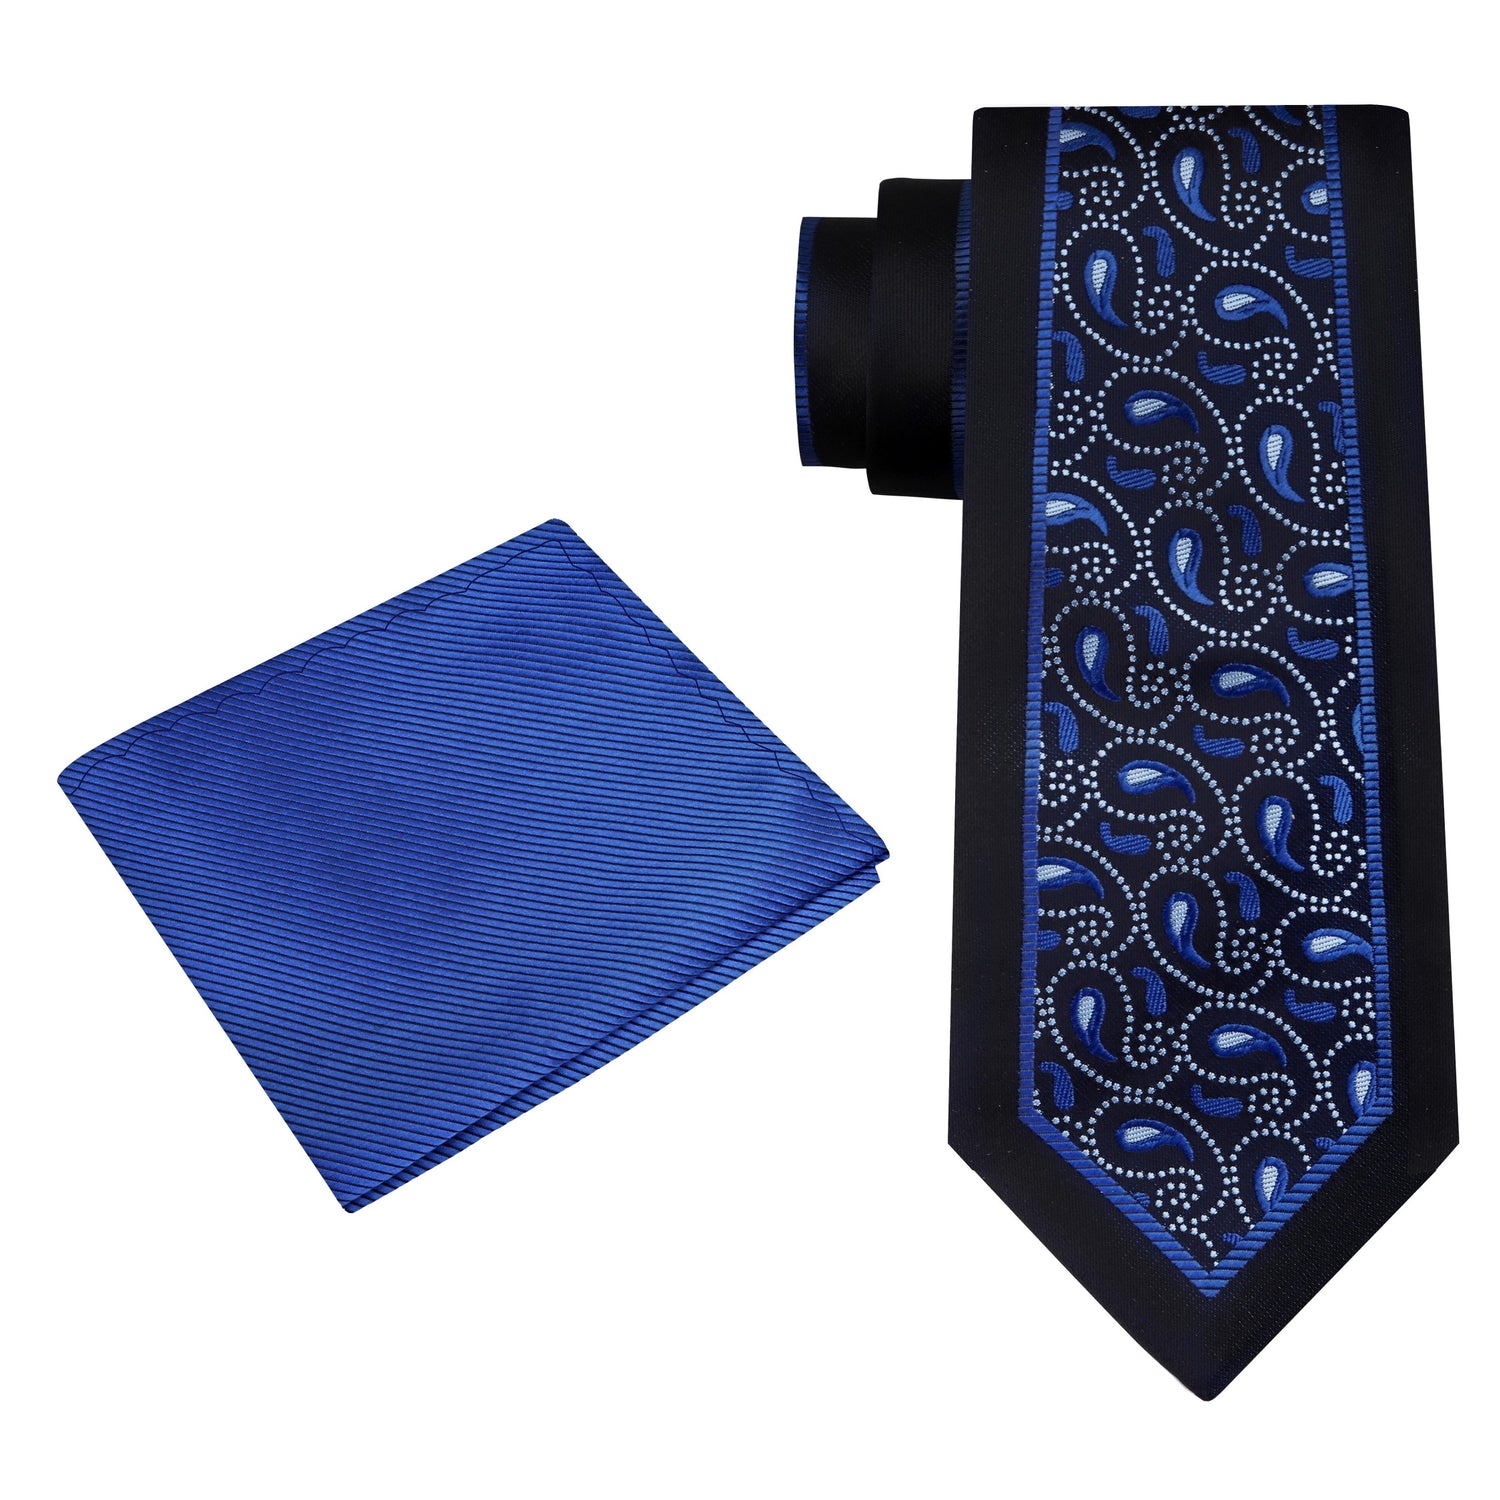 View 2: Black, Blue Paisley Tie and Square